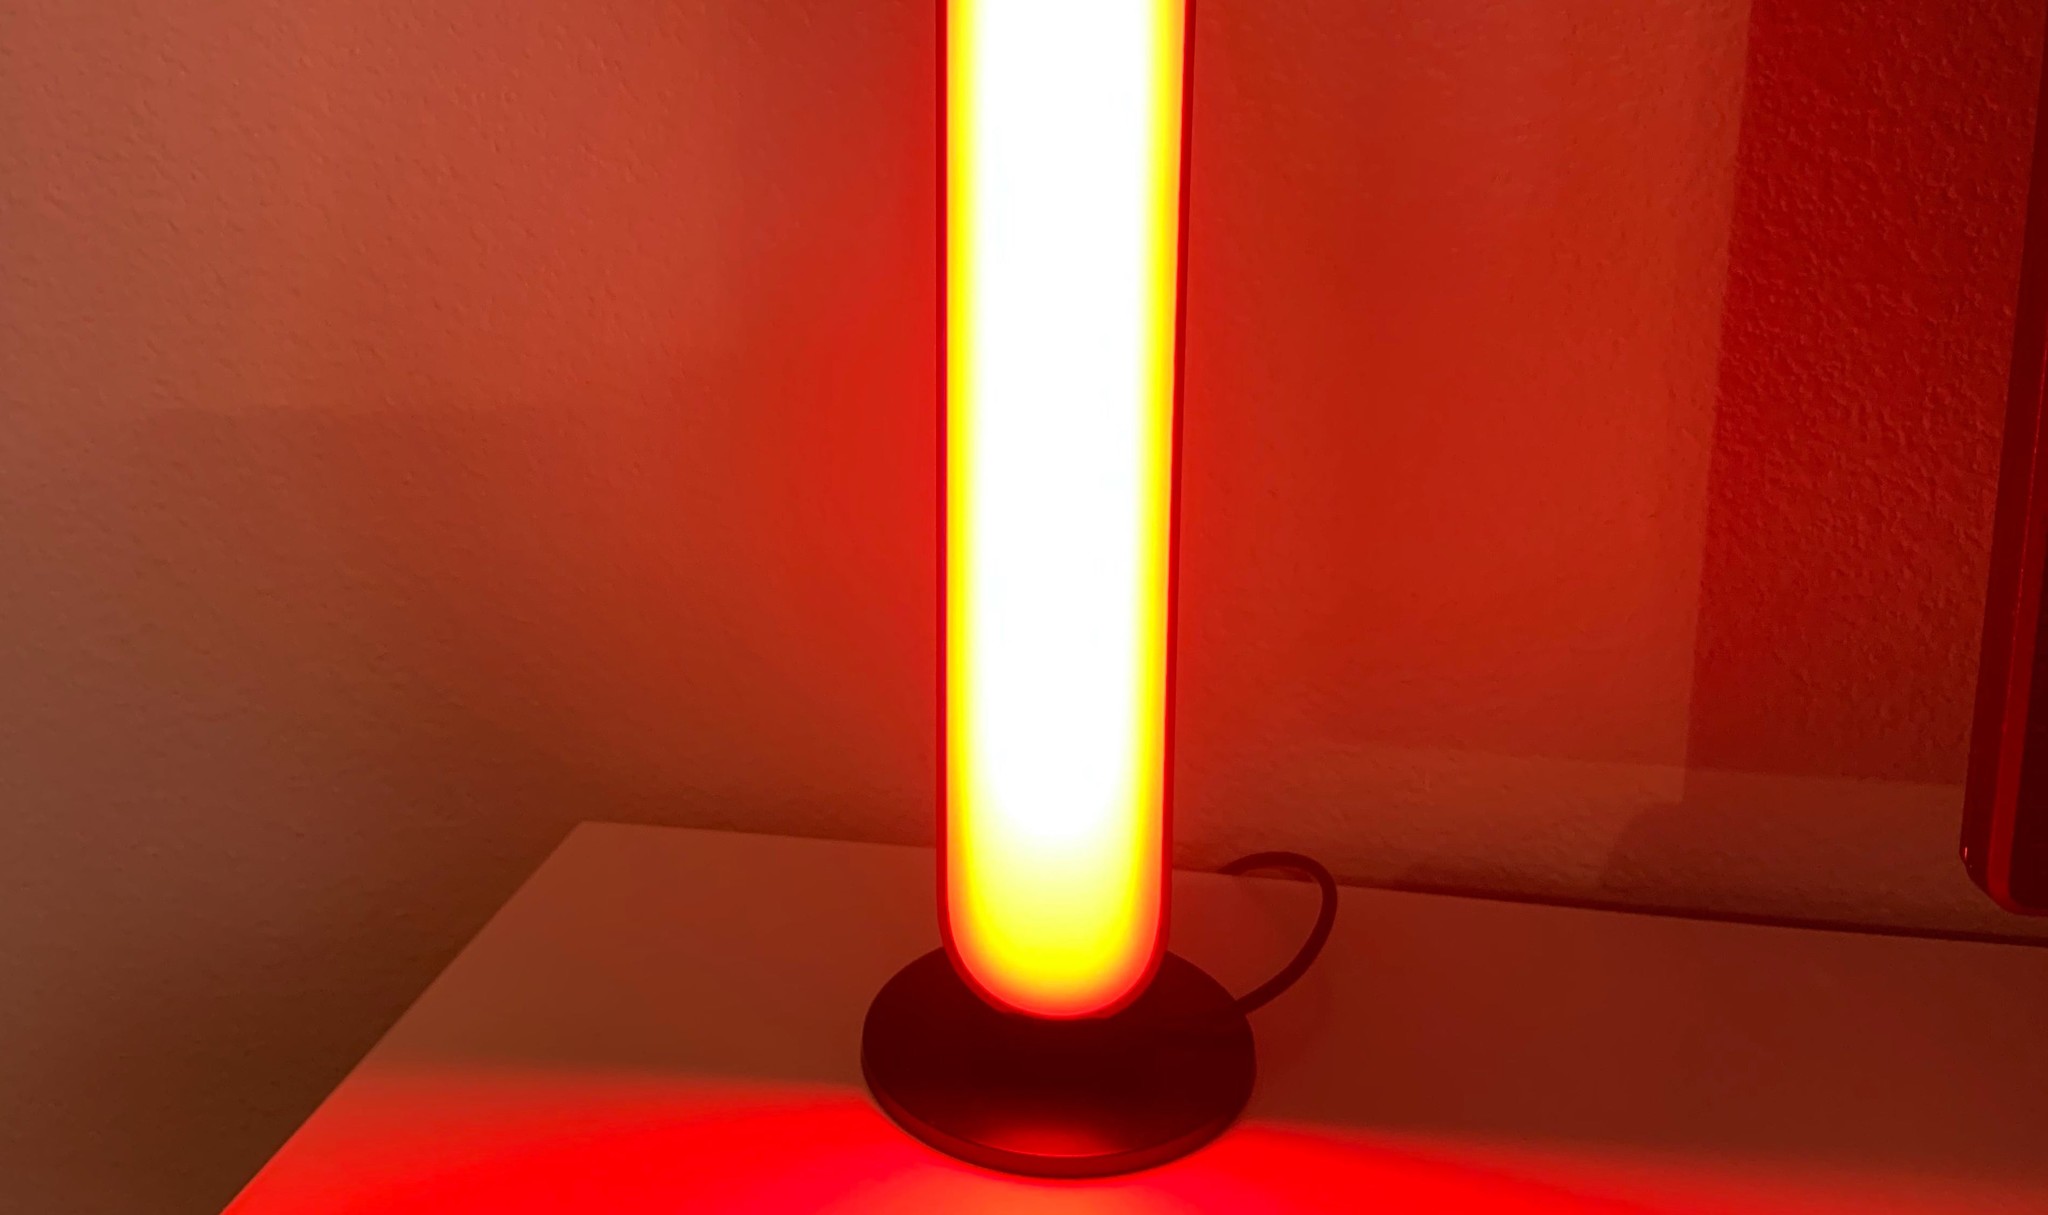 Philips Hue Play Bar illuminated with red color